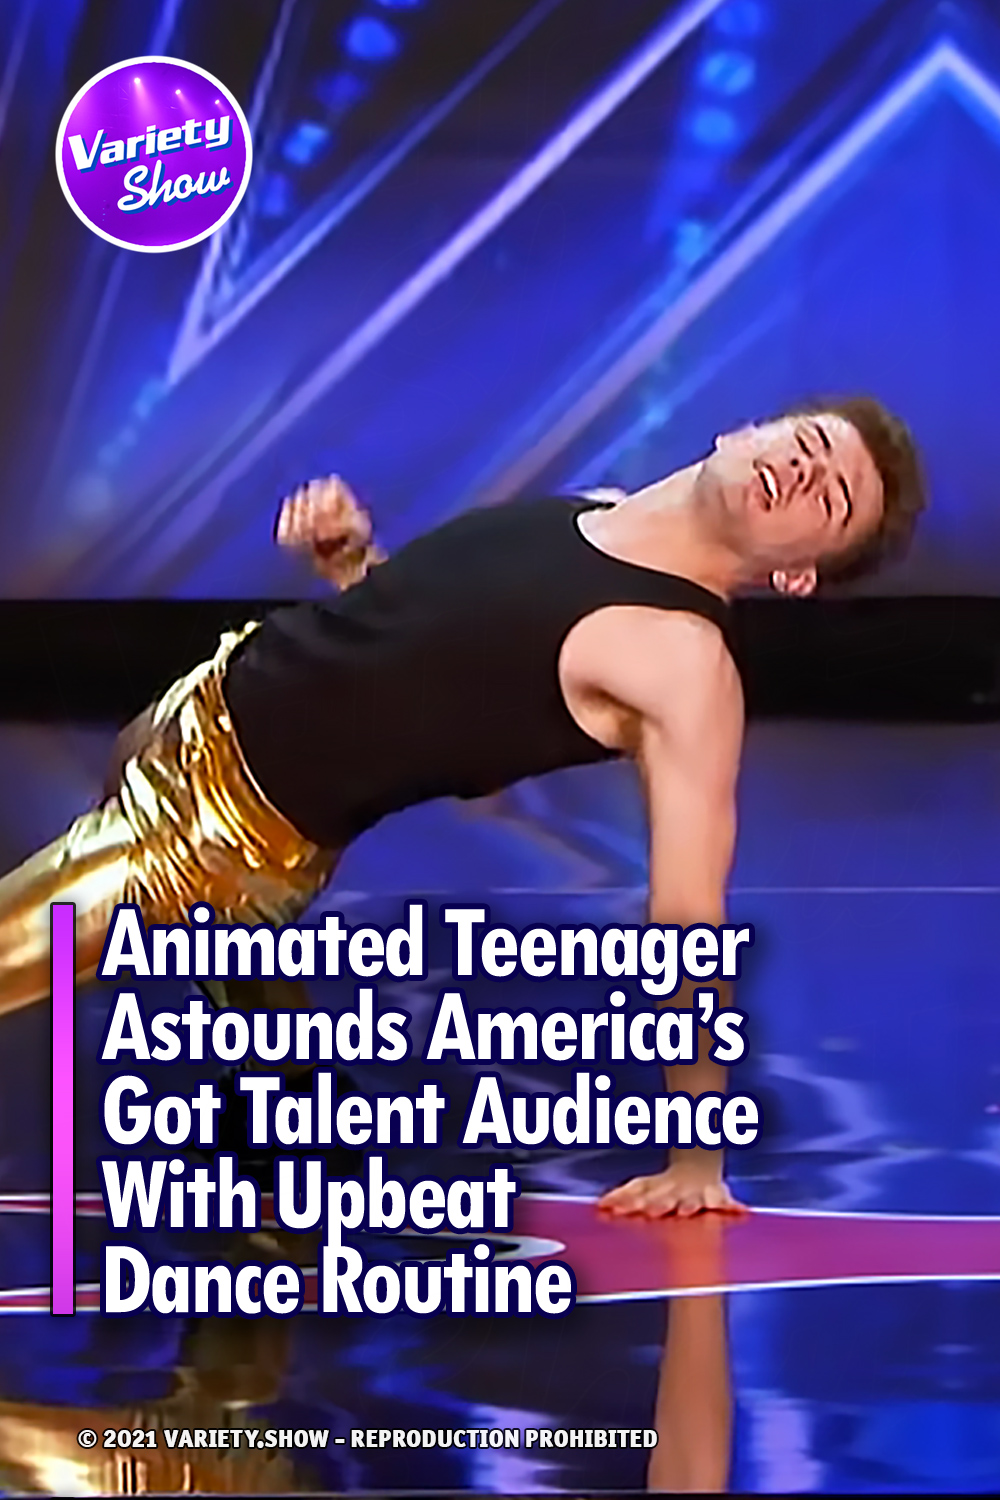 Animated Teenager Astounds America’s Got Talent Audience With Upbeat Dance Routine